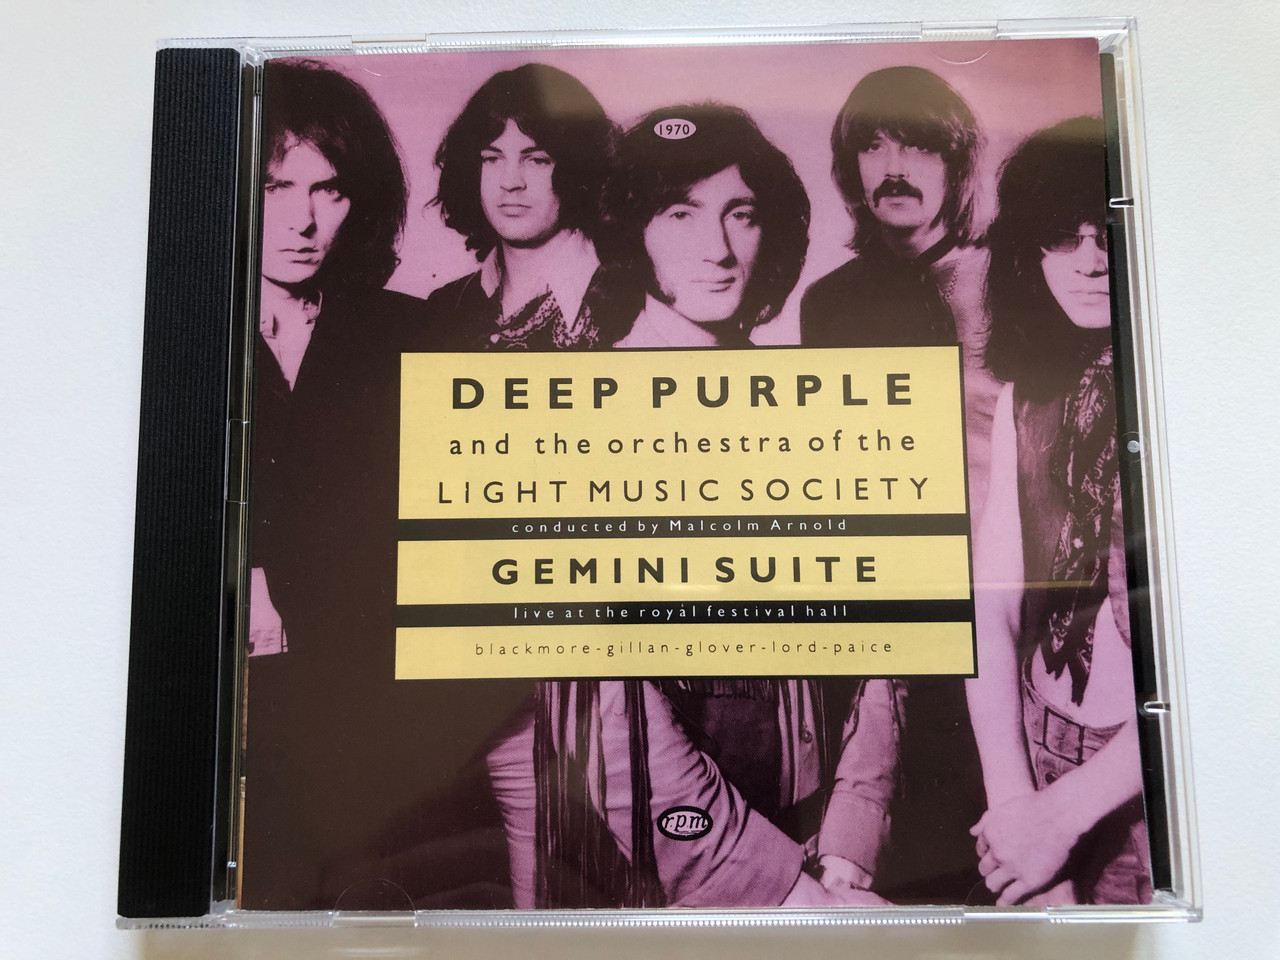 https://cdn10.bigcommerce.com/s-62bdpkt7pb/products/0/images/237546/Deep_Purple_And_The_Orchestra_Of_The_Light_Music_Society_-_Conducted_By_Malcolm_Arnold_Gemini_Suite_Live_at_the_Royal_Festival_Hall_RPM_Records_Audio_CD_1993_RPM_114_1__87821.1657196947.1280.1280.JPG?c=2&_gl=1*ztiuu3*_ga*MjA2NTIxMjE2MC4xNTkwNTEyNTMy*_ga_WS2VZYPC6G*MTY1NzE5NjE4Ni40NzAuMS4xNjU3MTk3MDA2LjYw